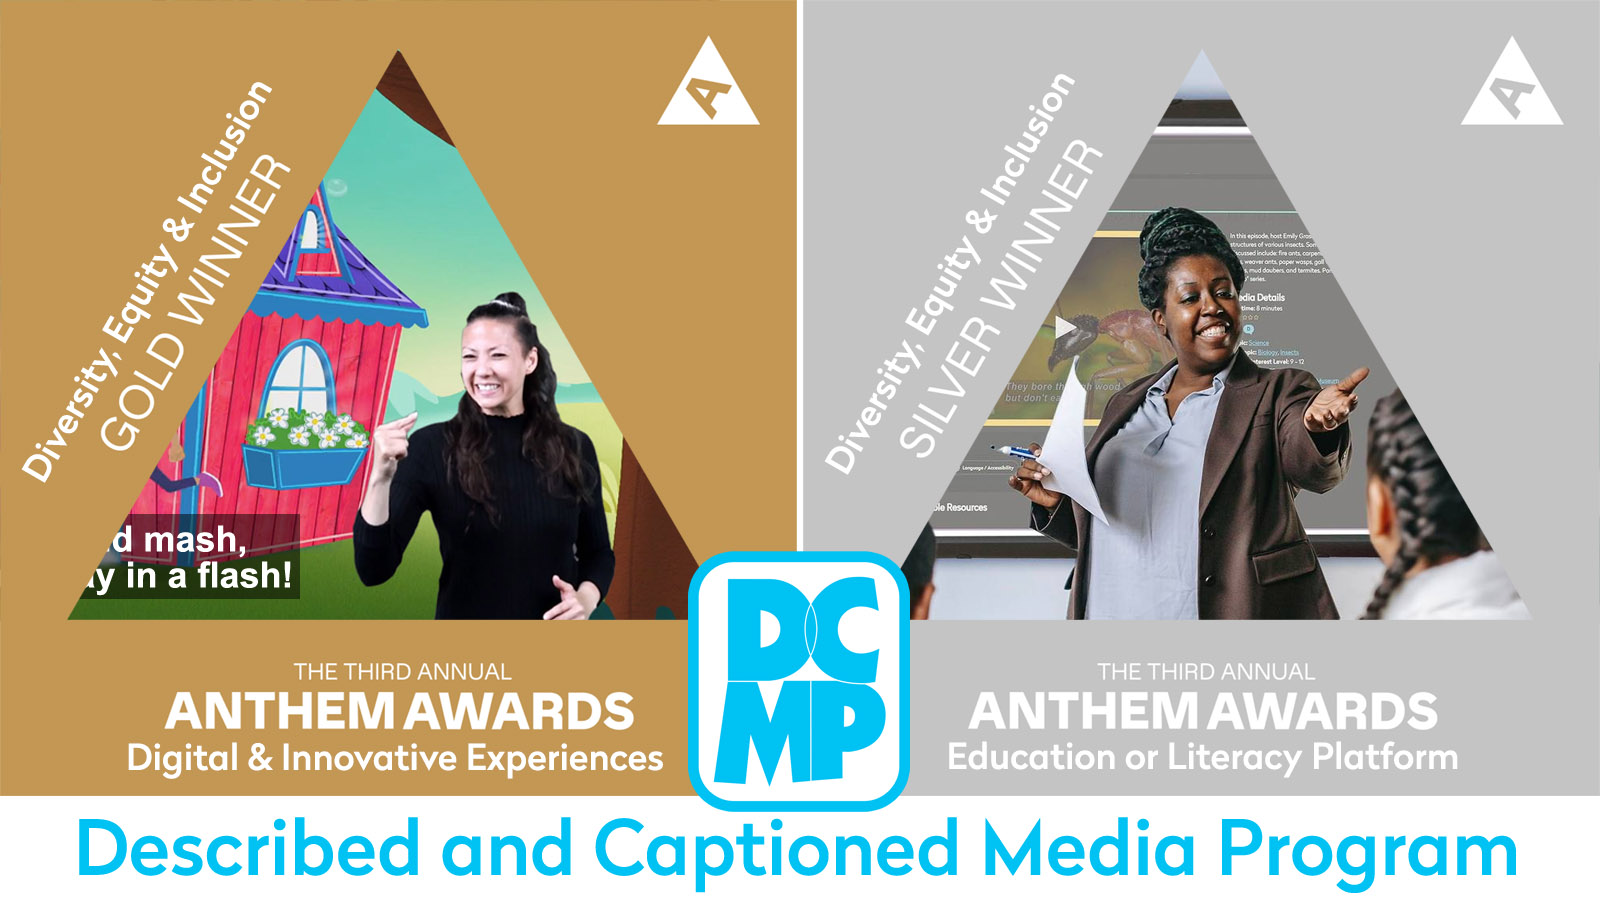 Inside two triangles, images of a sign language interpreter superimposed over a captioned video, and a teacher with students in a classroom with a DCMP video playing on a large screen. Text says The Third Annual Anthem Awards. Gold winner, Diversity, Equity and Inclusion, Digital and Innovative Experiences. Silver winner,  Diversity, Equity and Inclusion, Education or Literacy Platform. Described and Captioned Media Program.